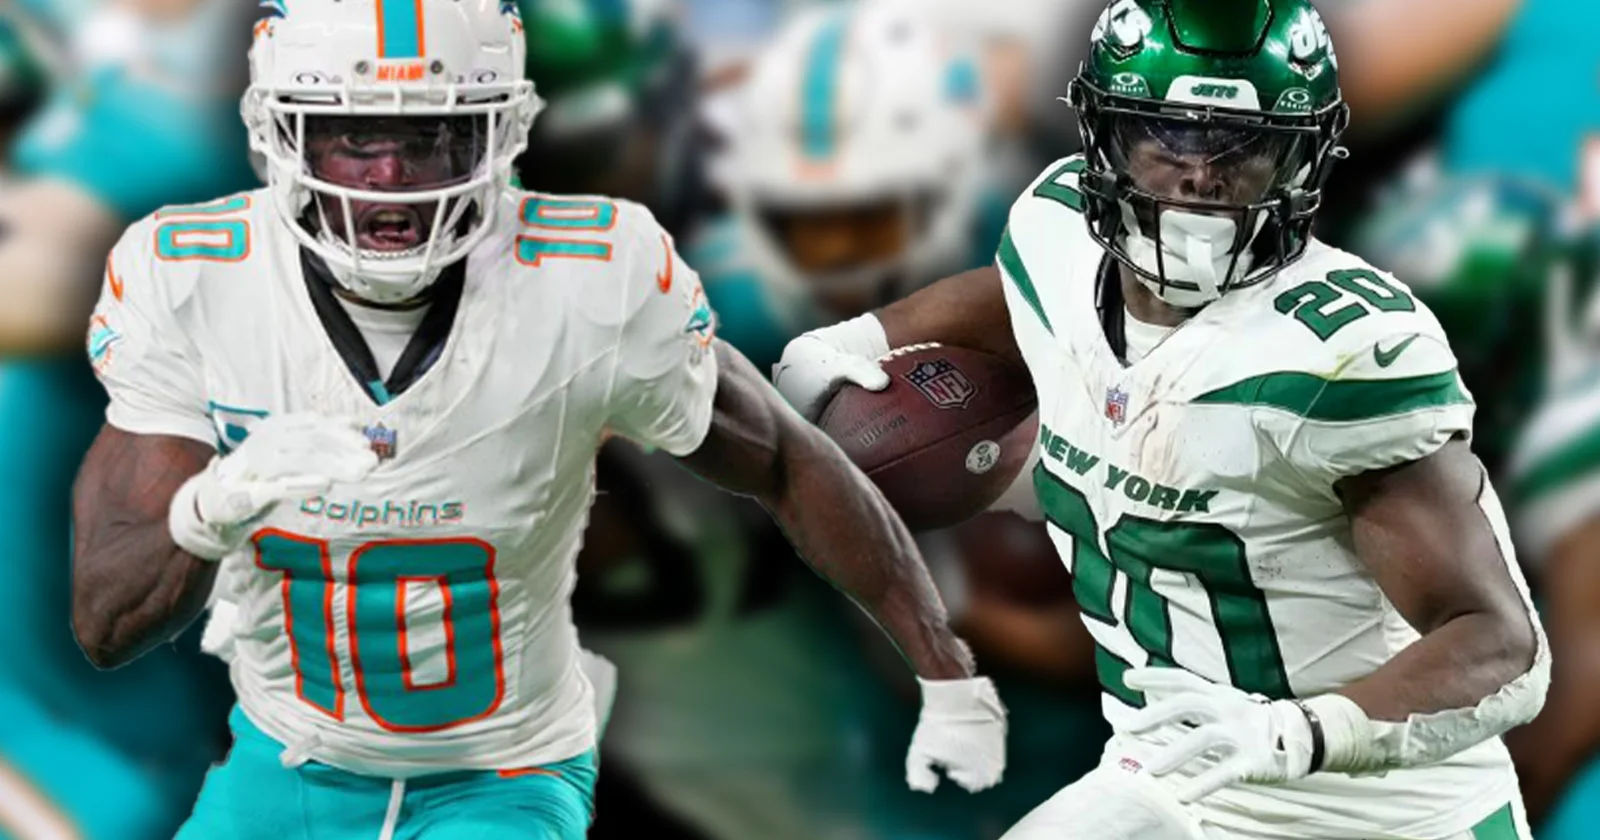 Where to Watch Dolphins Vs. Jets Free Live Stream of NFL Black Friday Game